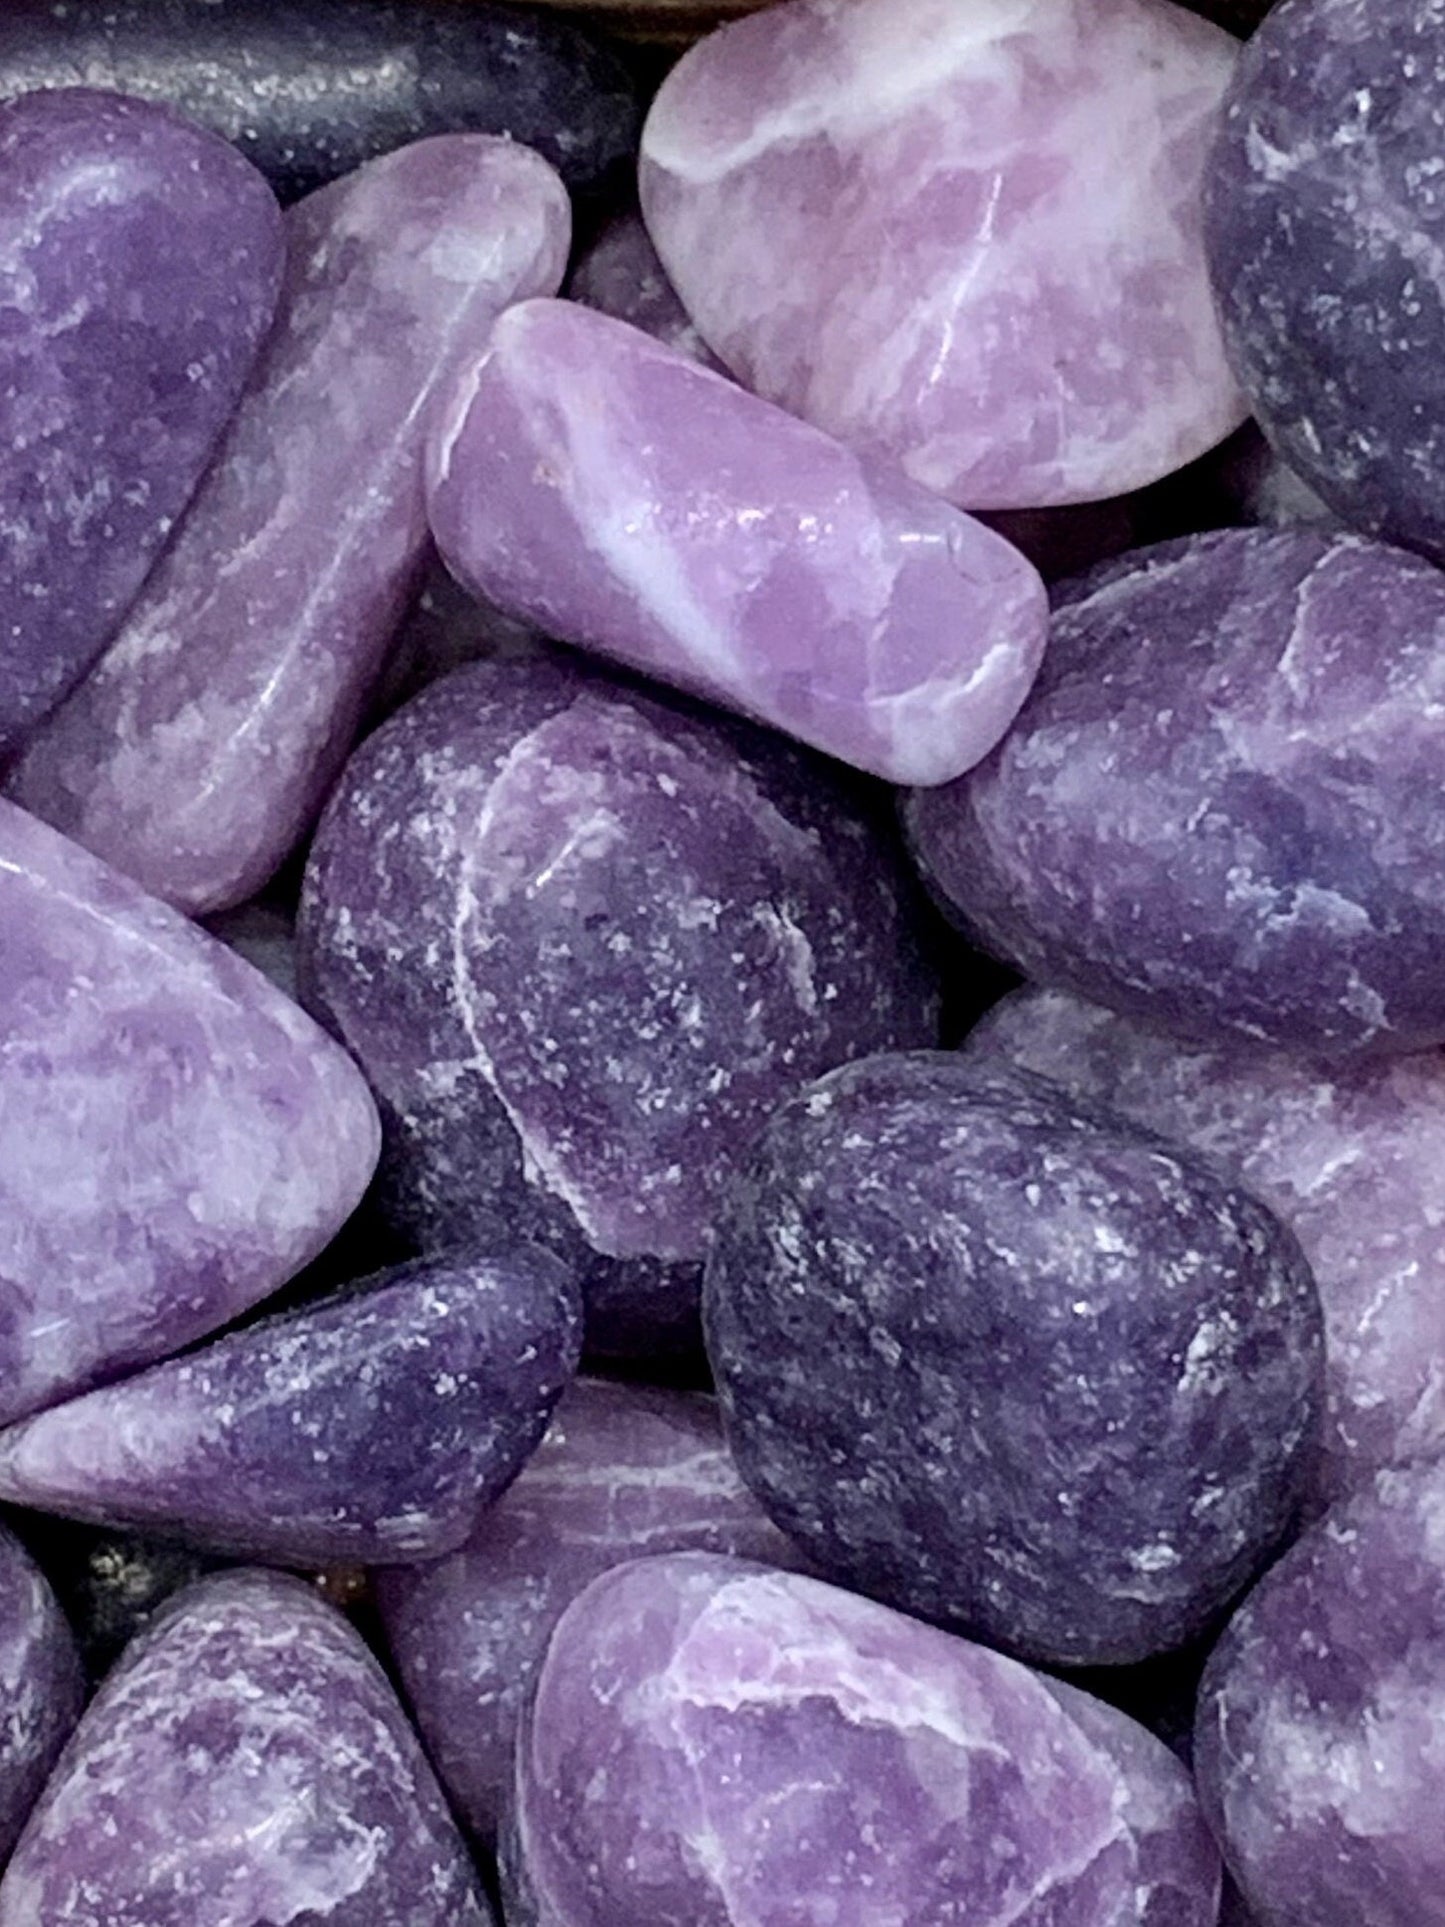 Lepidolite Tumbled Polished Stones Natural Crystal Gemstones / Metaphysical Crystals for Anxiety, Depression Relief